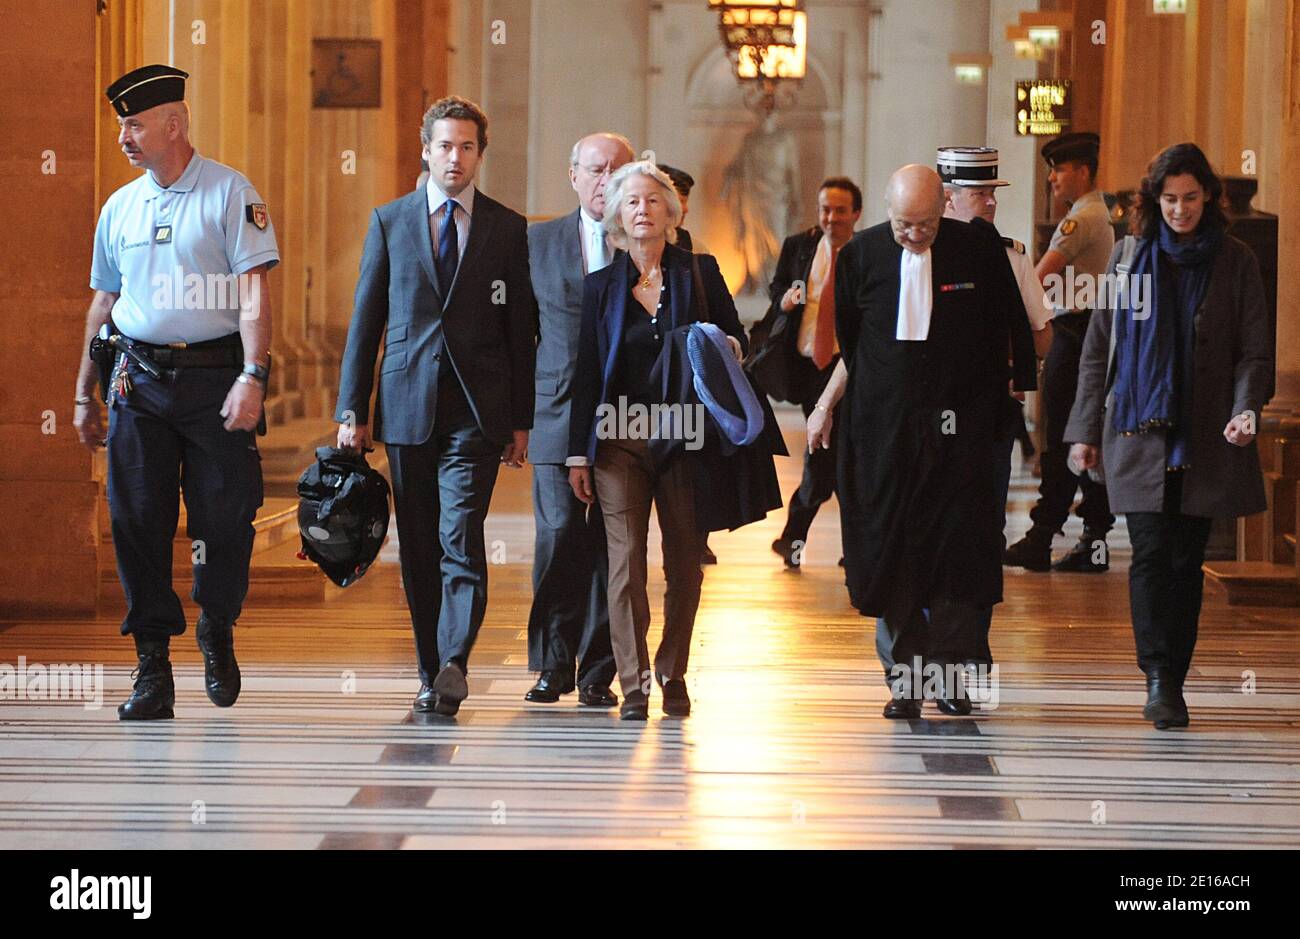 Dominique Erignac, widow of former French prefect Claude Erignac with her son, her daughter and her lawyer Philippe Lemaire arrive at Paris court hall in Paris, France on May 2, 2011 for the opening of Yvan Colonna's appeal trial for the murder in 1998 of Claude Erignac, France's top state official on the Mediterranean island of Corsica. Photo by Giancarlo Gorassini/ABACAPRESS.COM Stock Photo